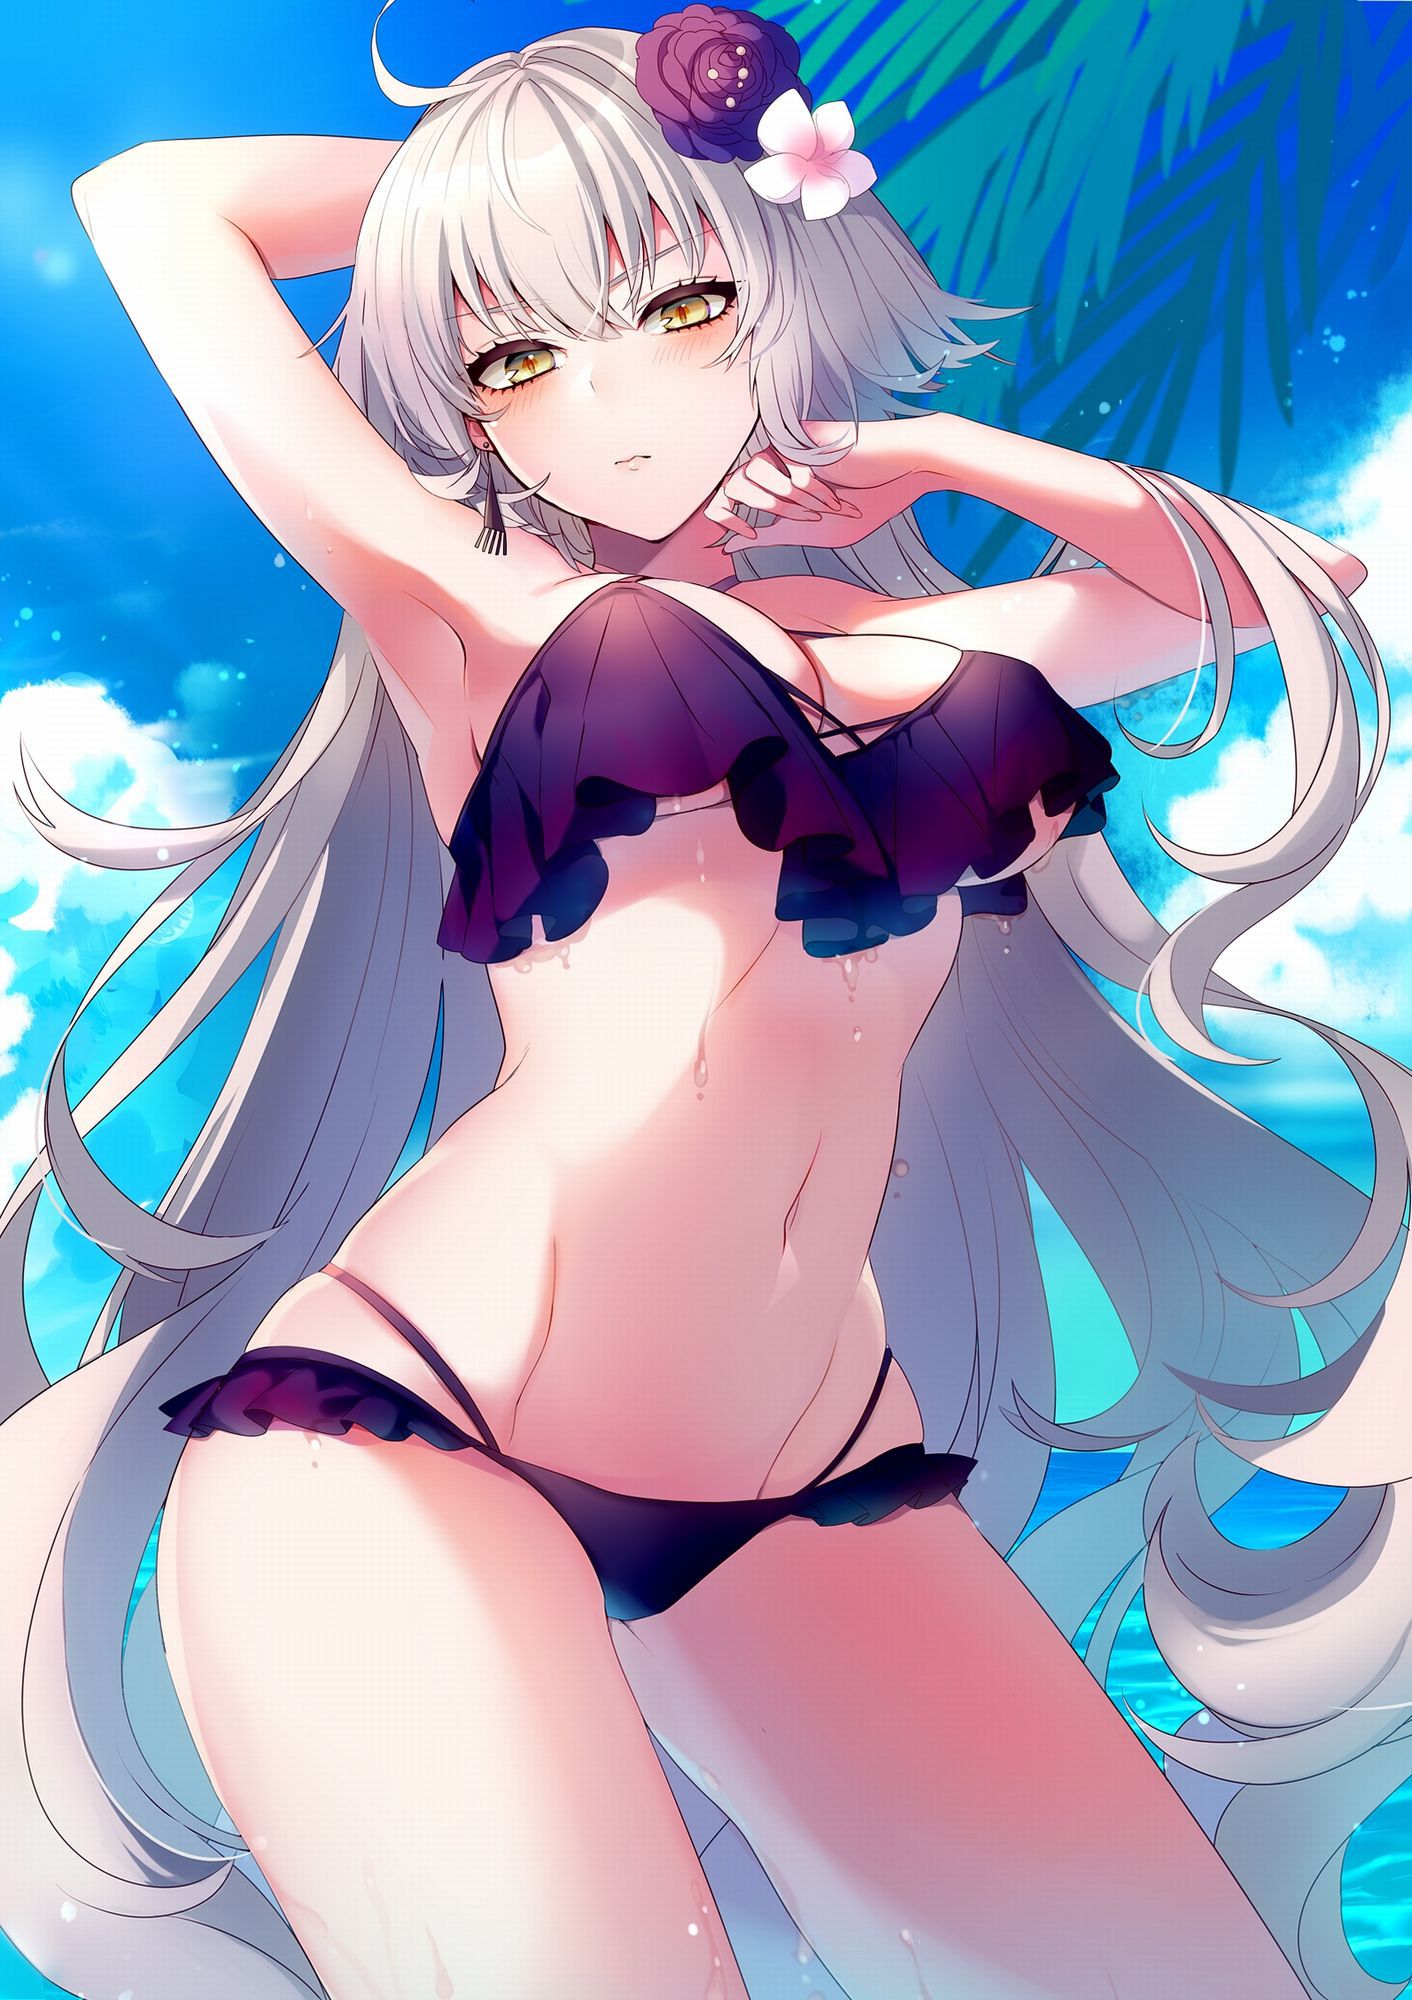 [2nd] secondary image of a cool girl wearing a swimsuit part 4 [non-erotic swimsuit] 30